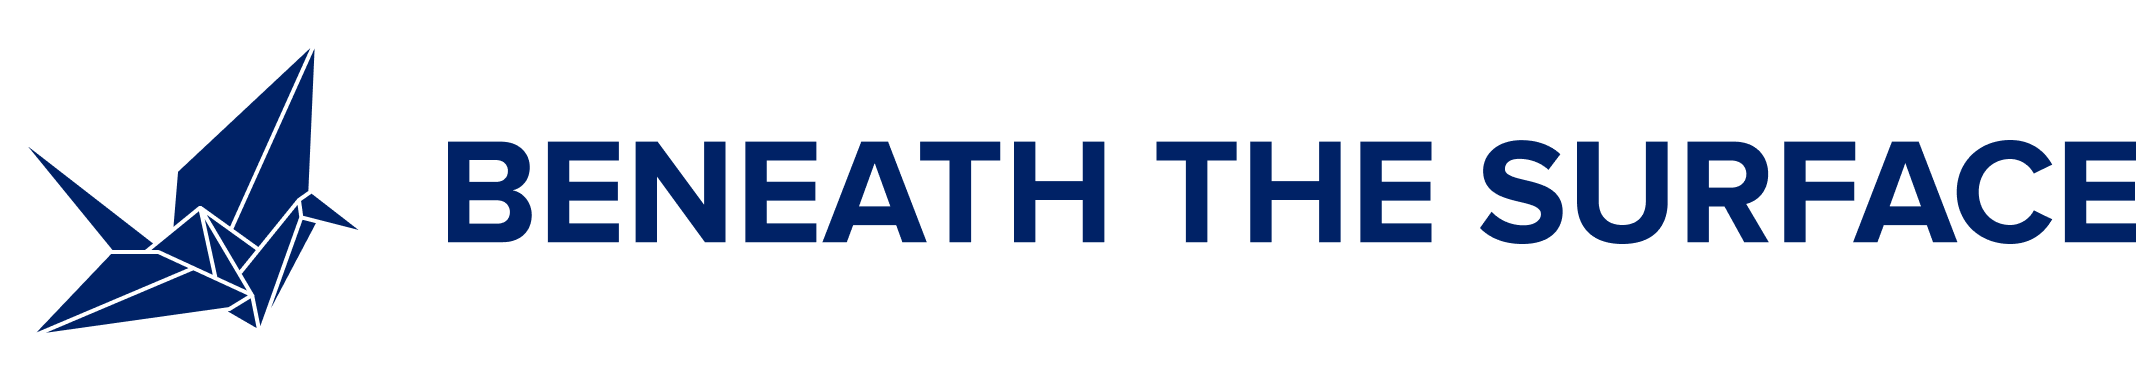 Crane logo with the text: Beneath the Surface